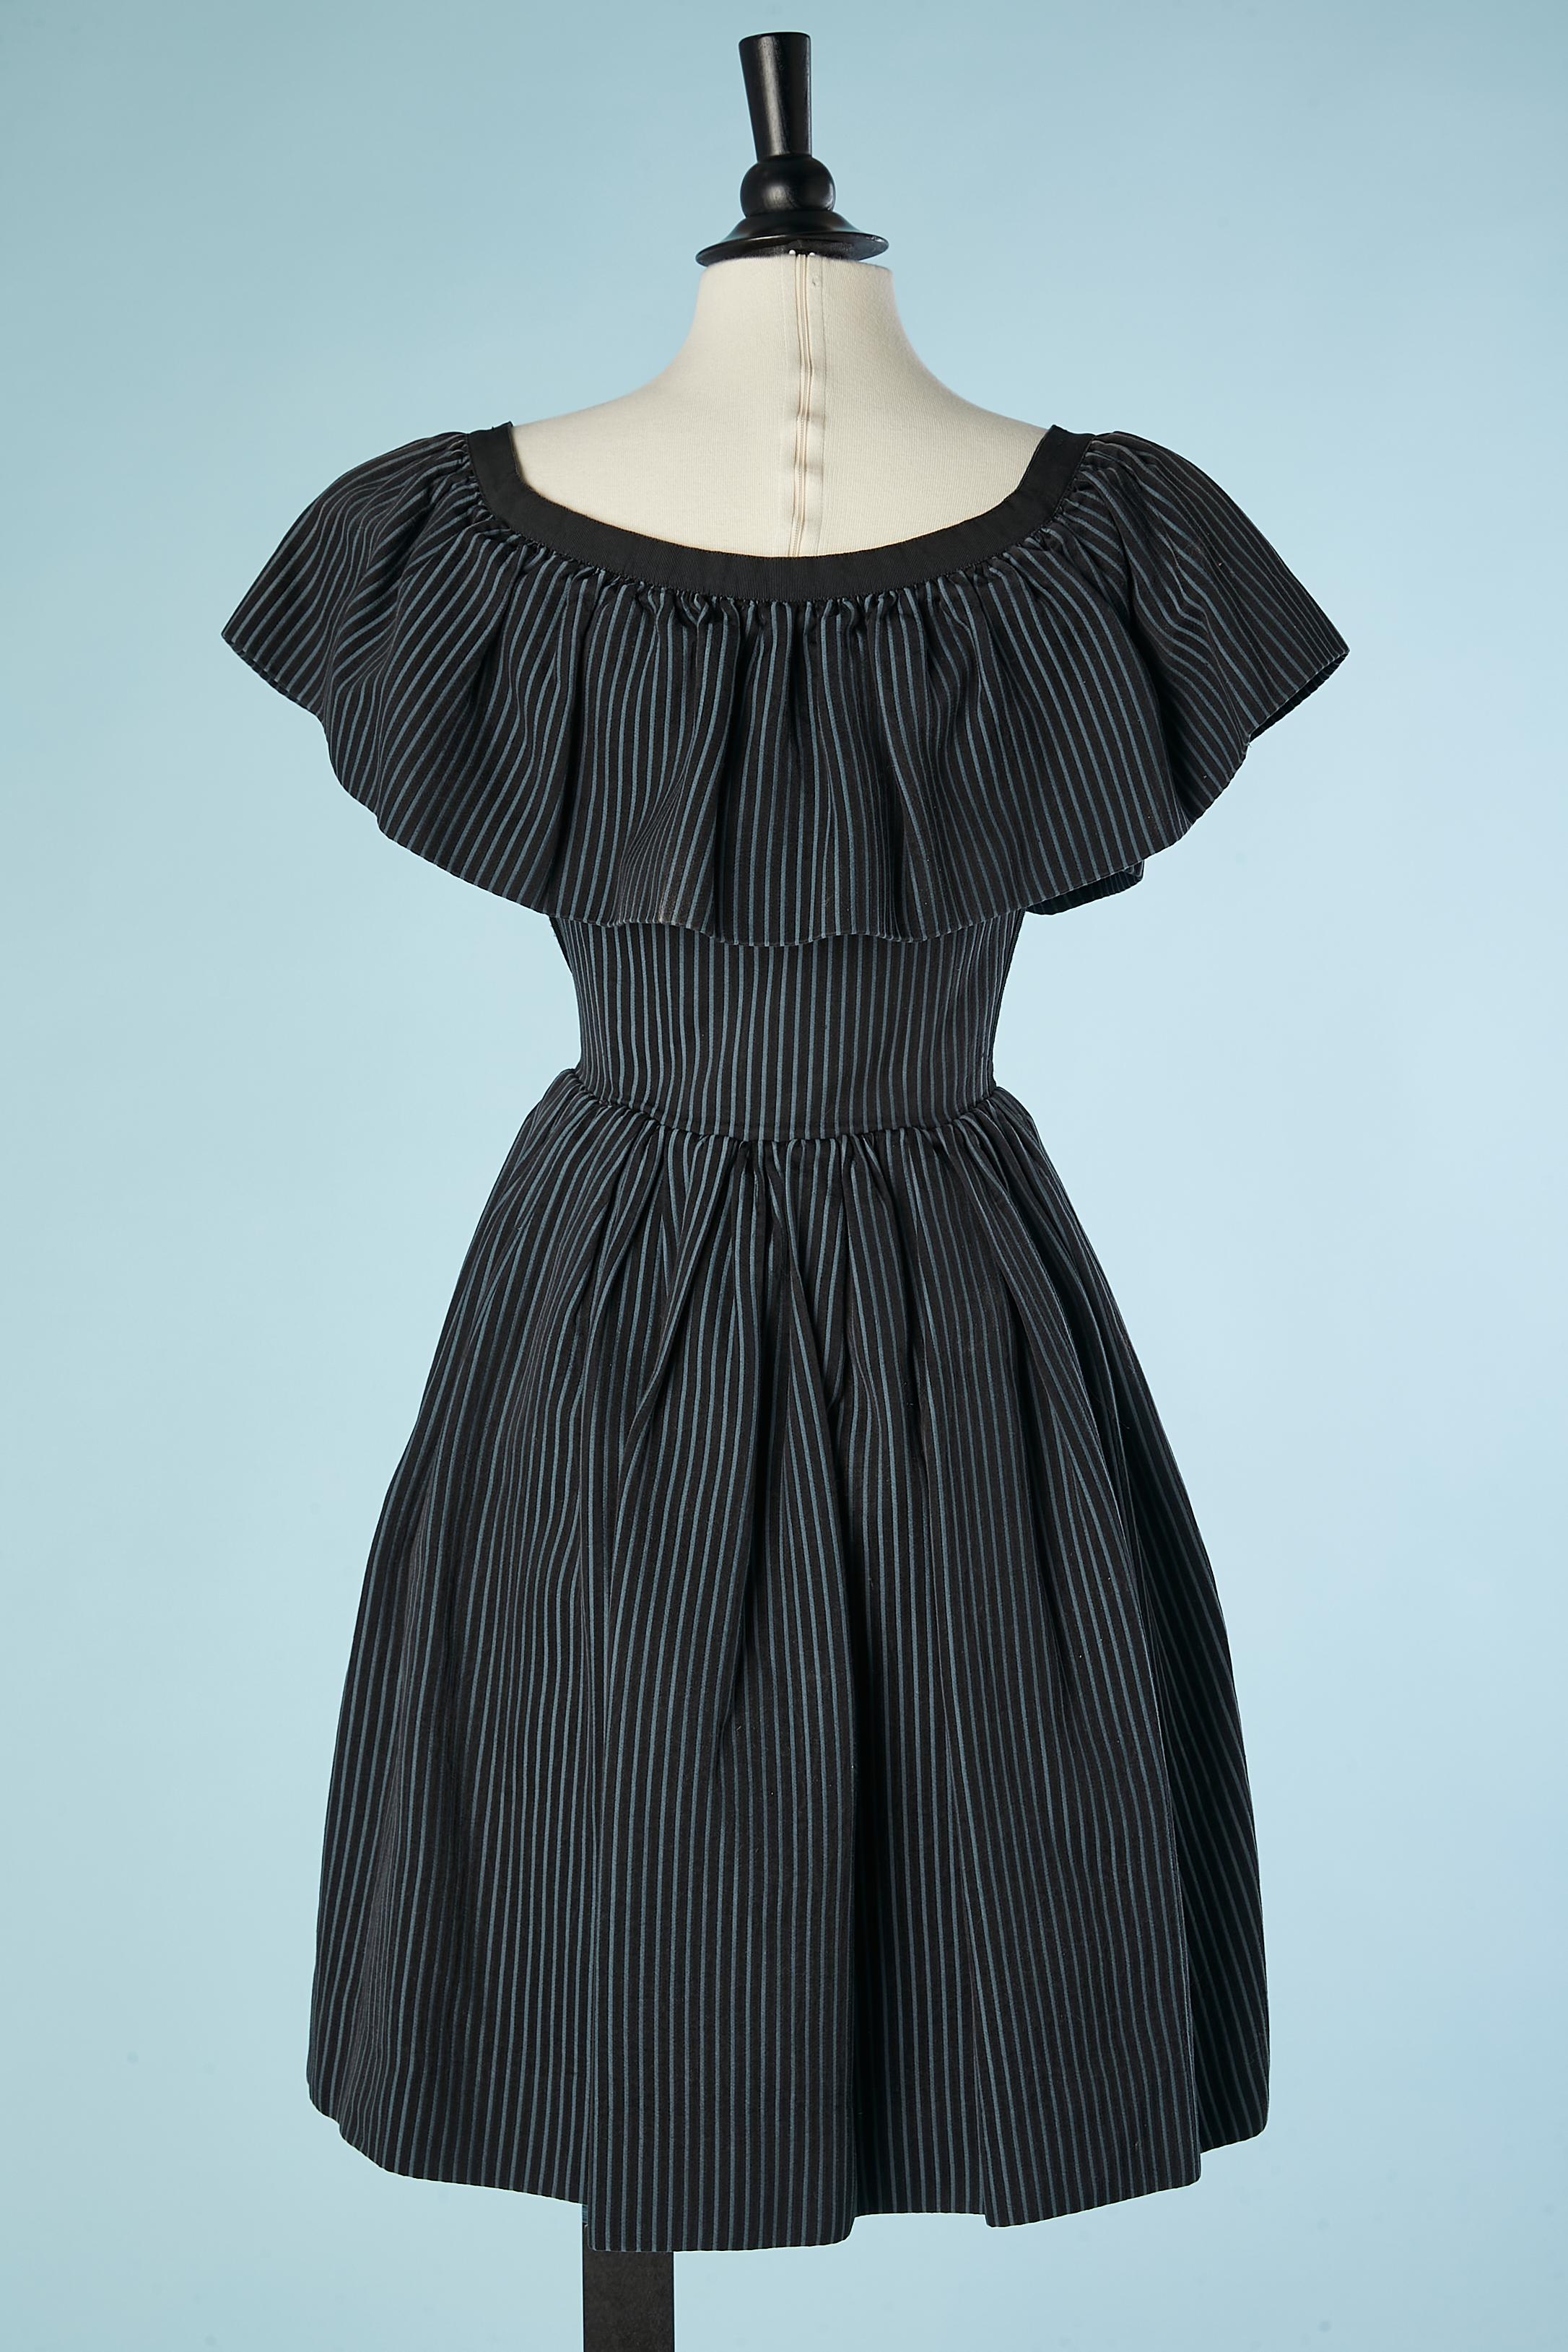 Black cotton dress with blue stripes, ruffles and bow YSL Rive Gauche  For Sale 1